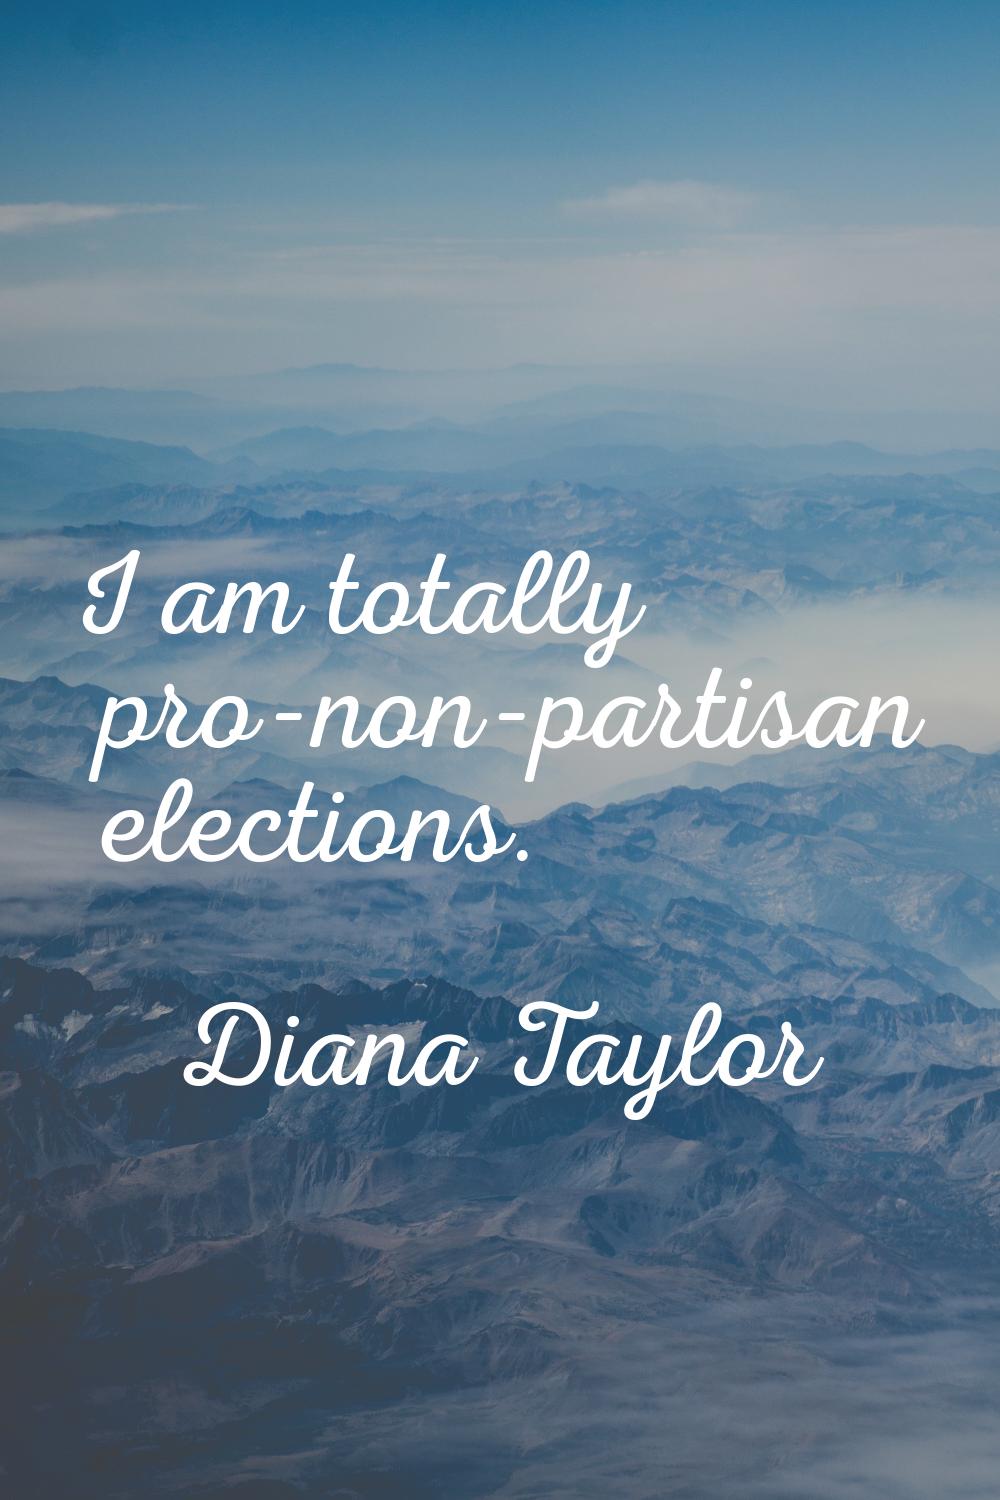 I am totally pro-non-partisan elections.